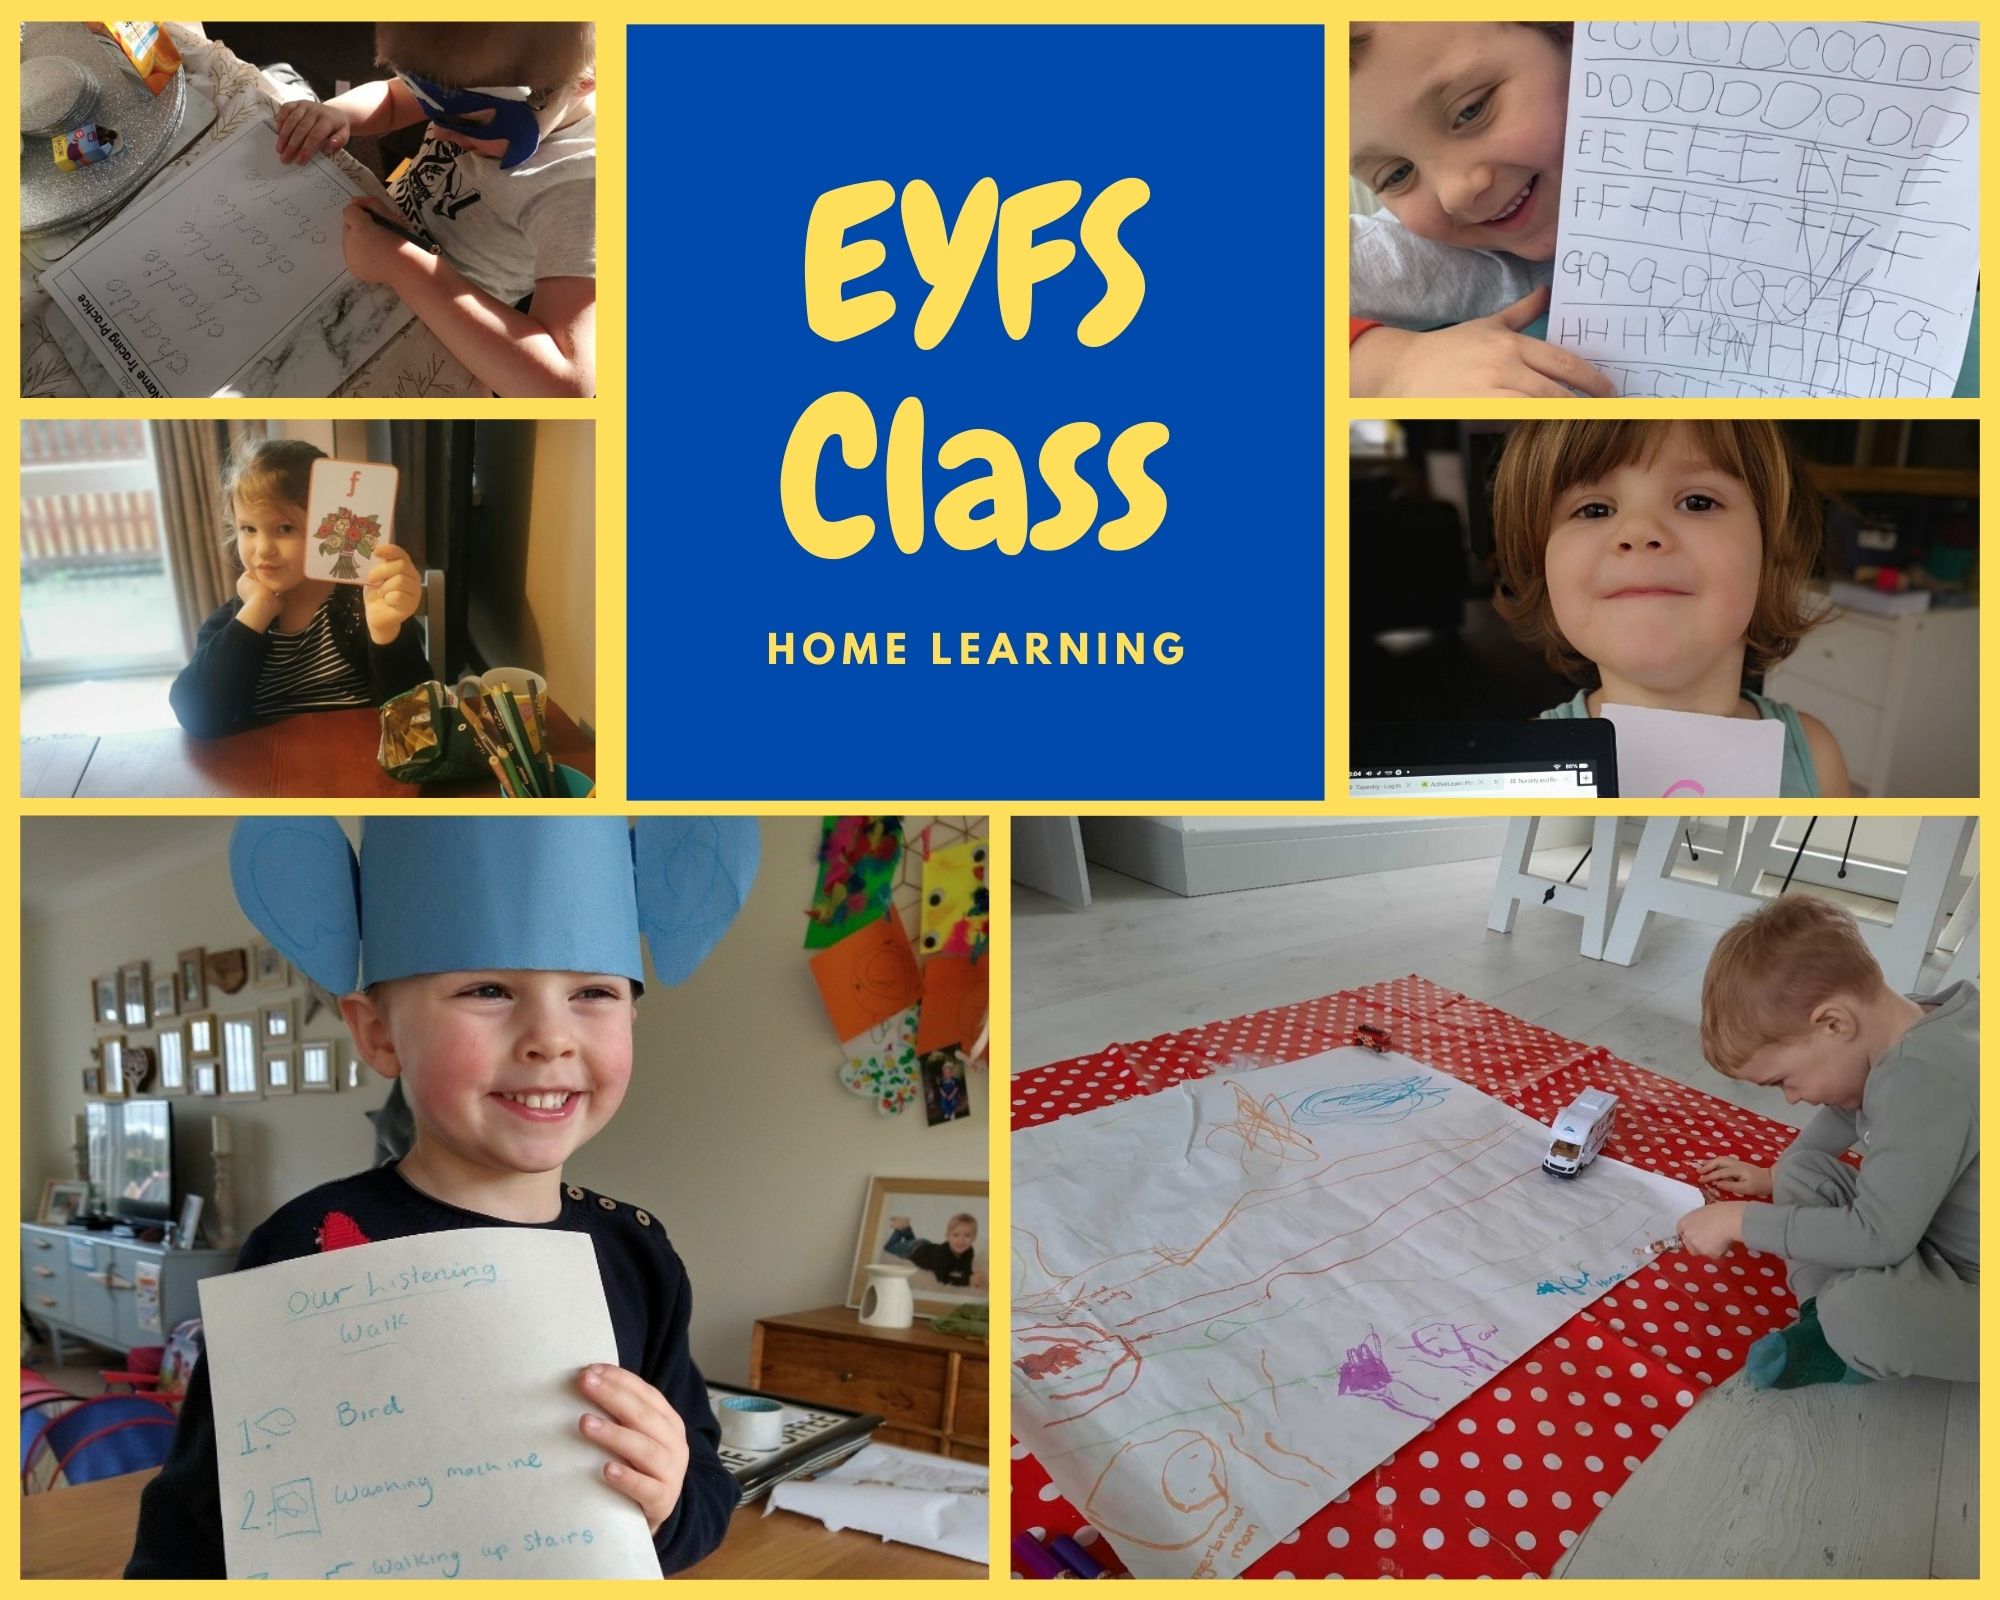 EYFS Class Home Learning